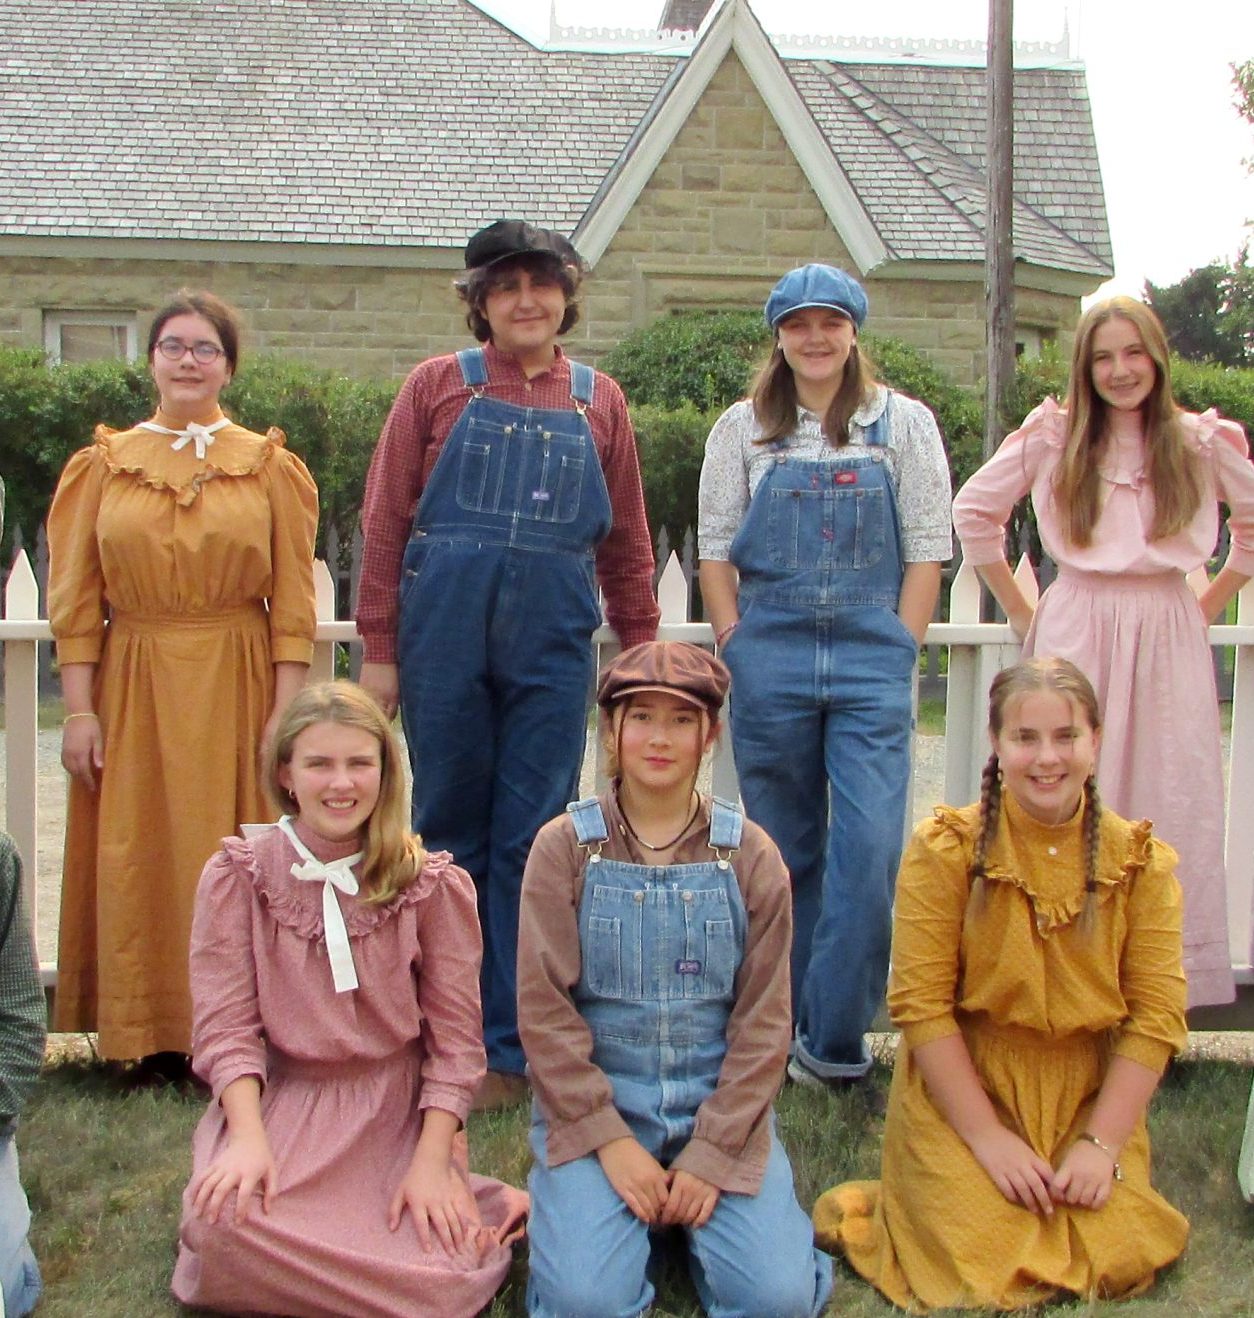 Group of summer camp people in costume 